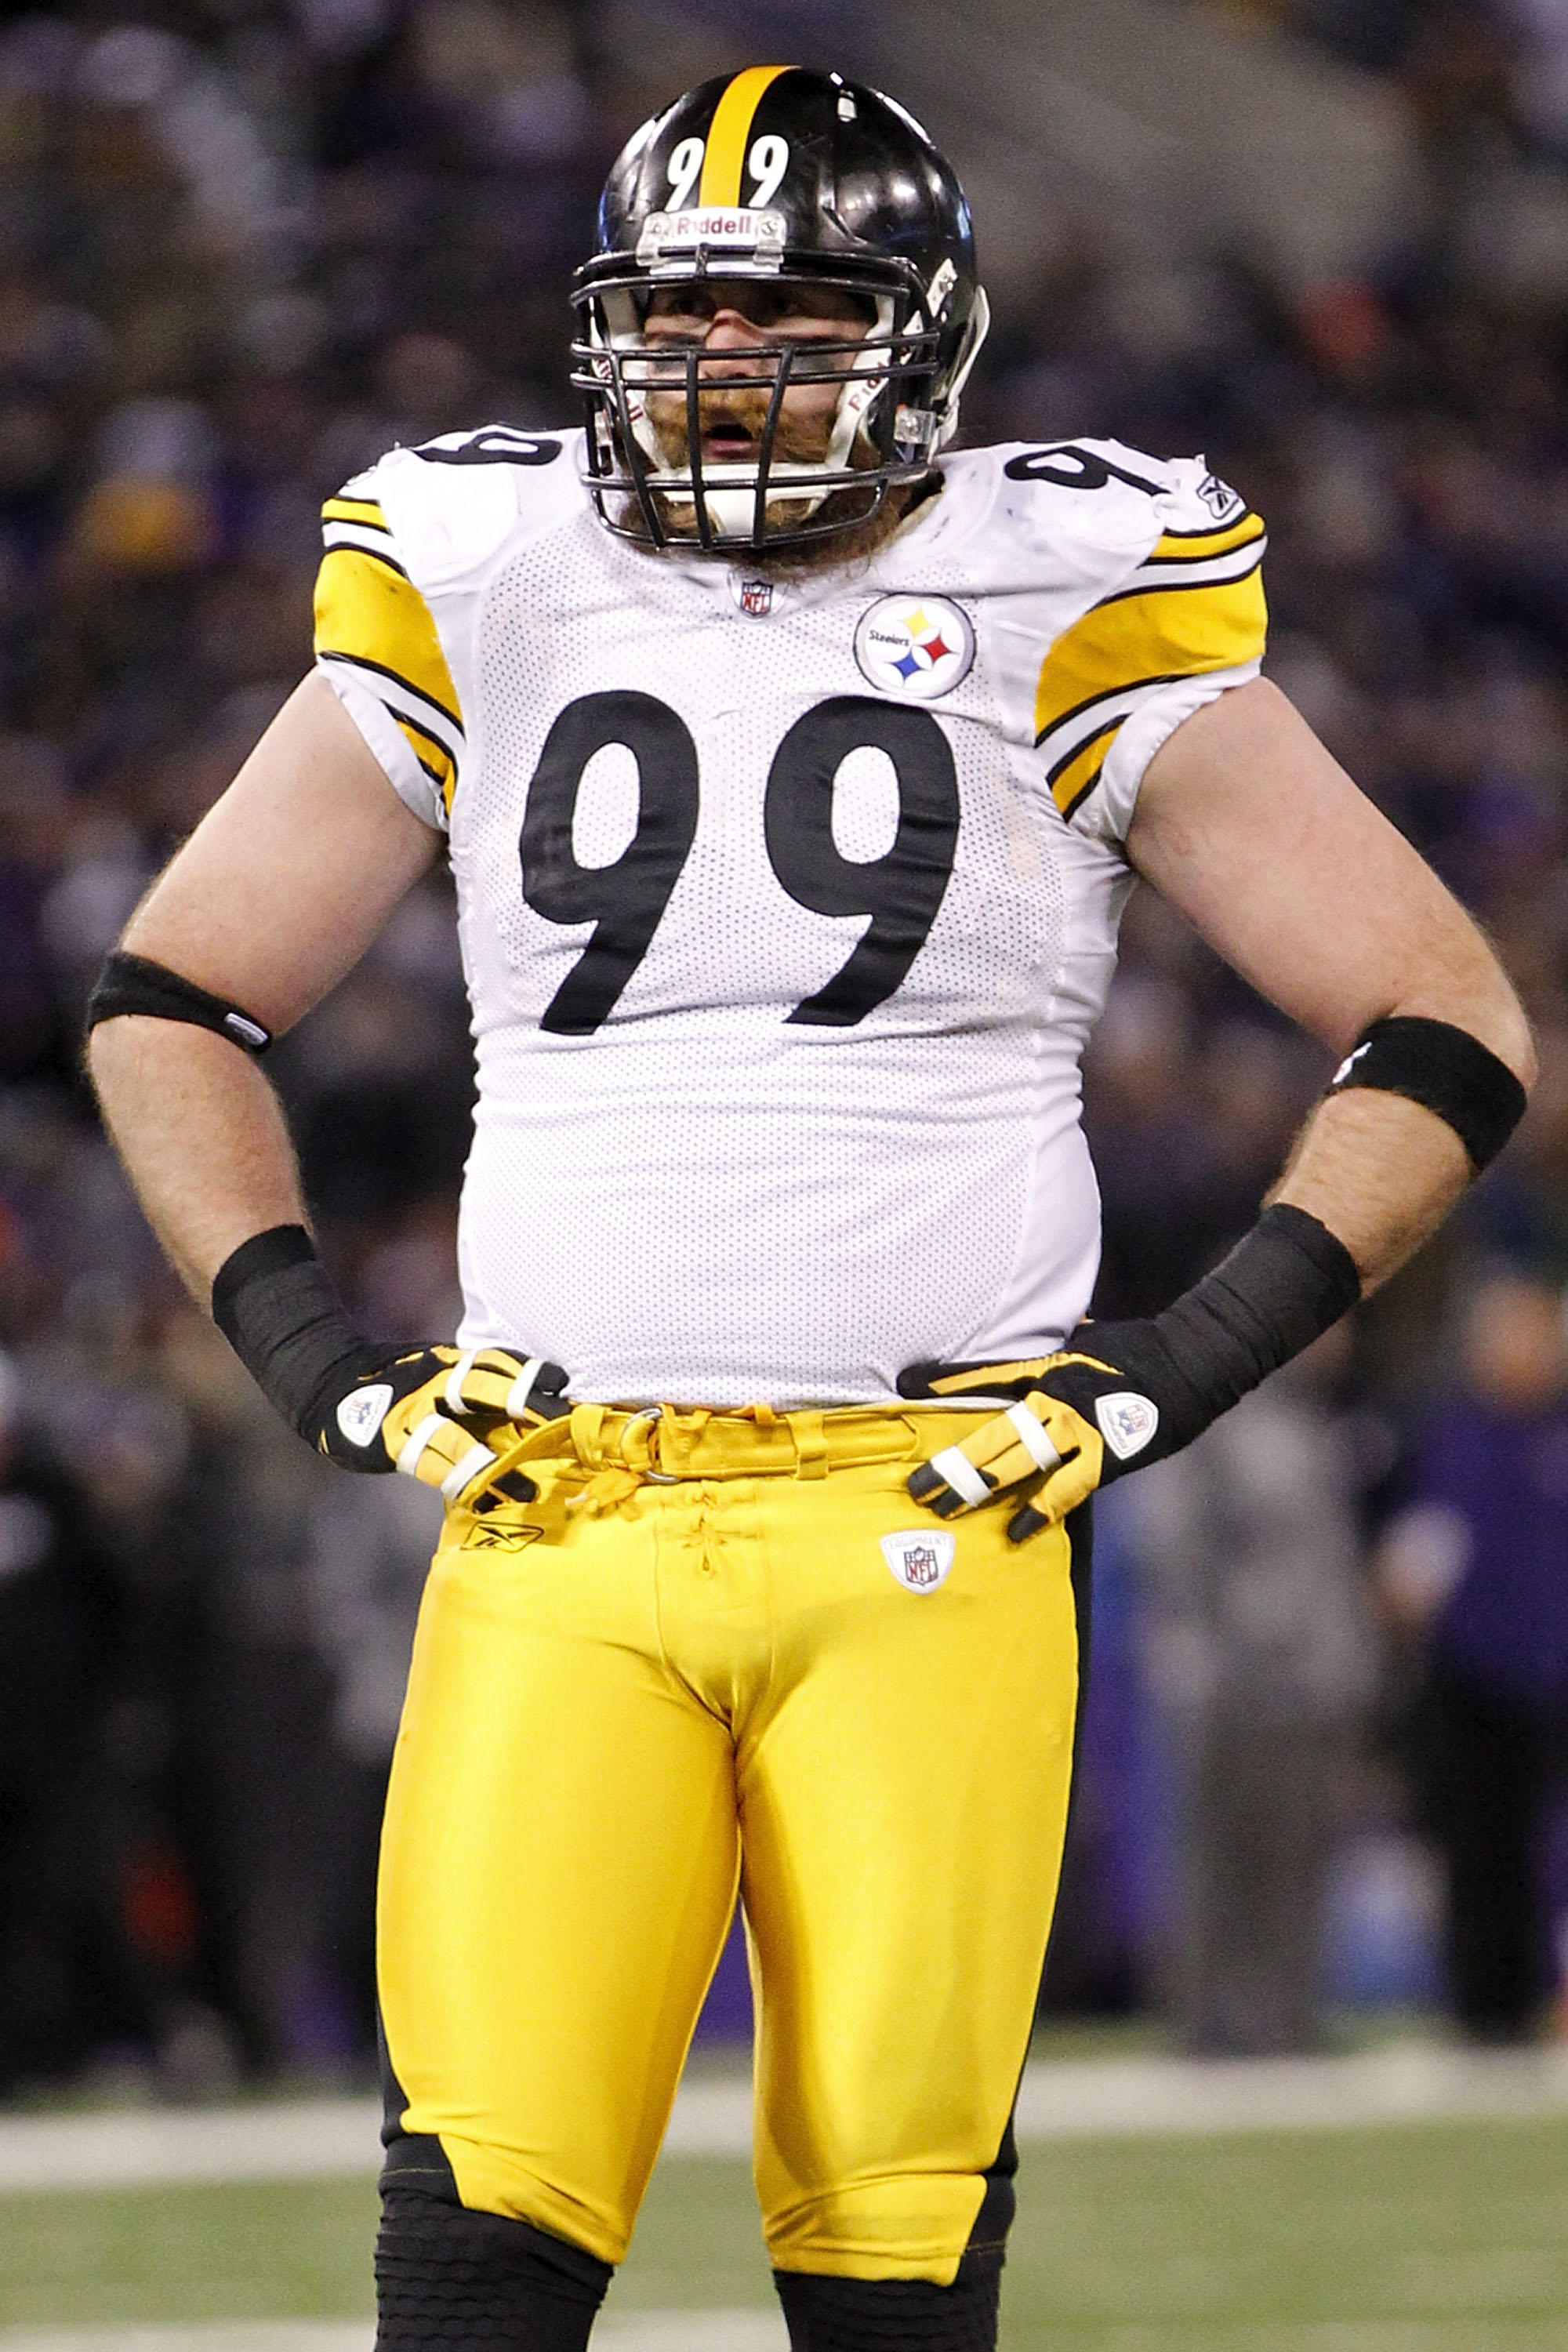 BALTIMORE, MD - DECEMBER 05: Brett Keisel #99 of the Pittsburgh Steelers stands on the field against the Baltimore Ravens at M&T Bank Stadium on December 5, 2010 in Baltimore, Maryland.  (Photo by Geoff Burke/Getty Images)